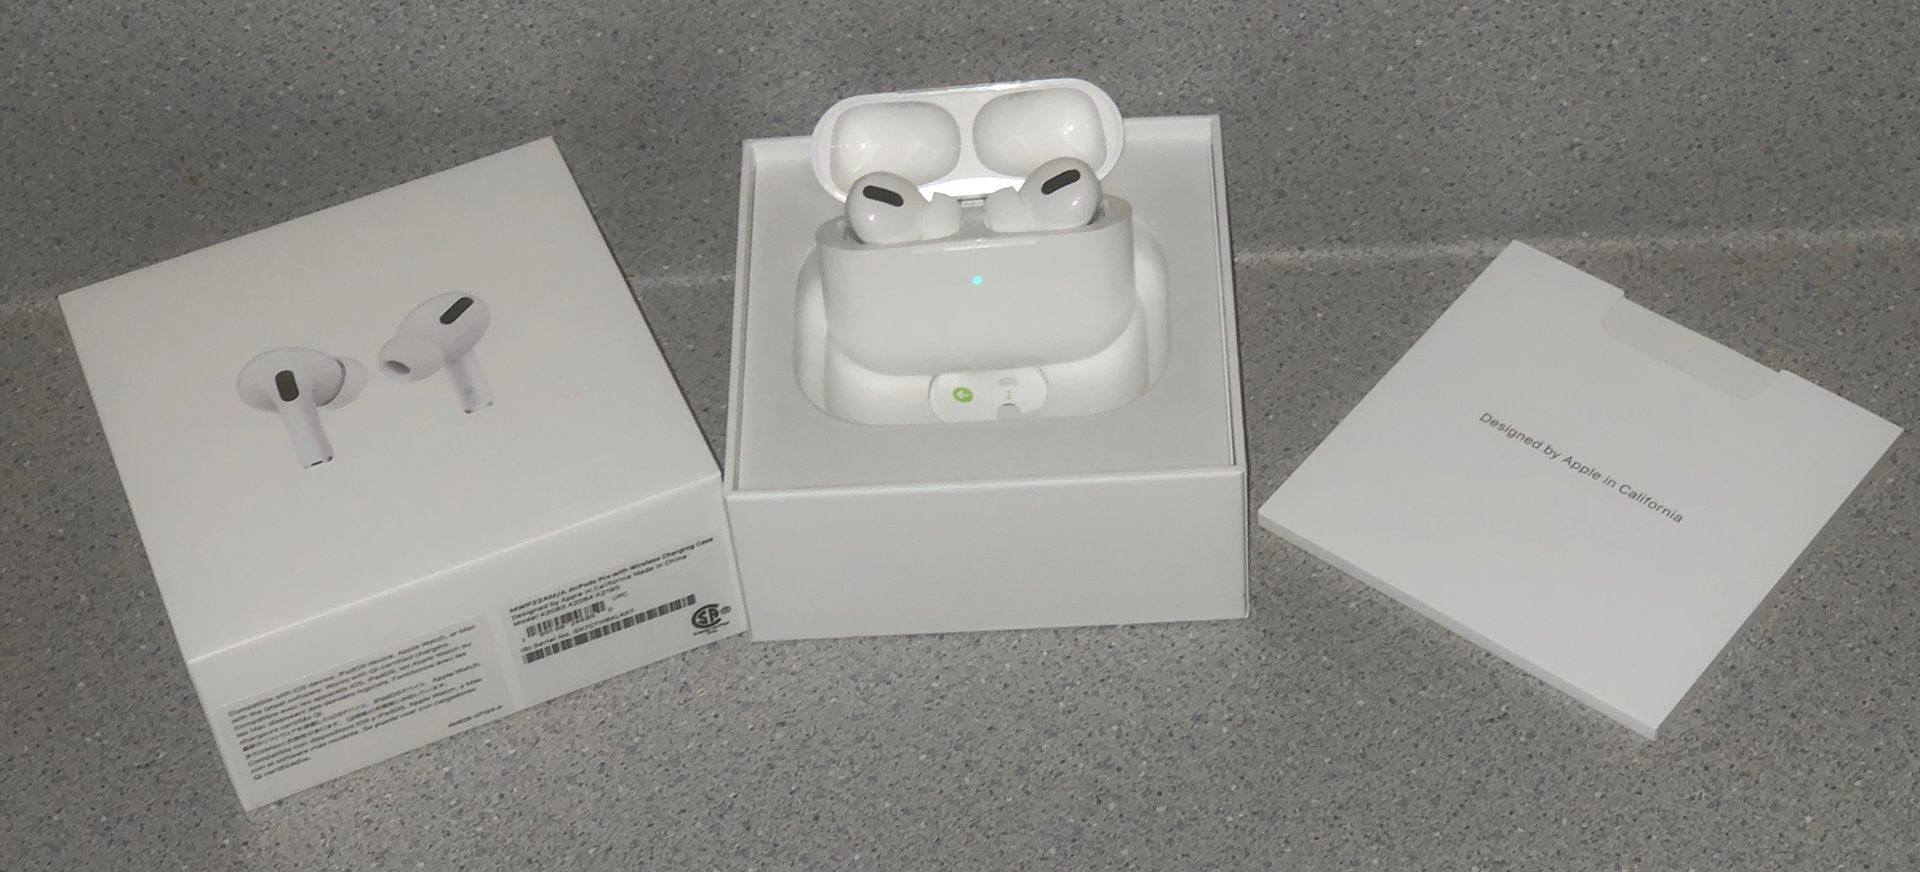 AirPod Pro with Wireless Charging Case missing Lighting Cable